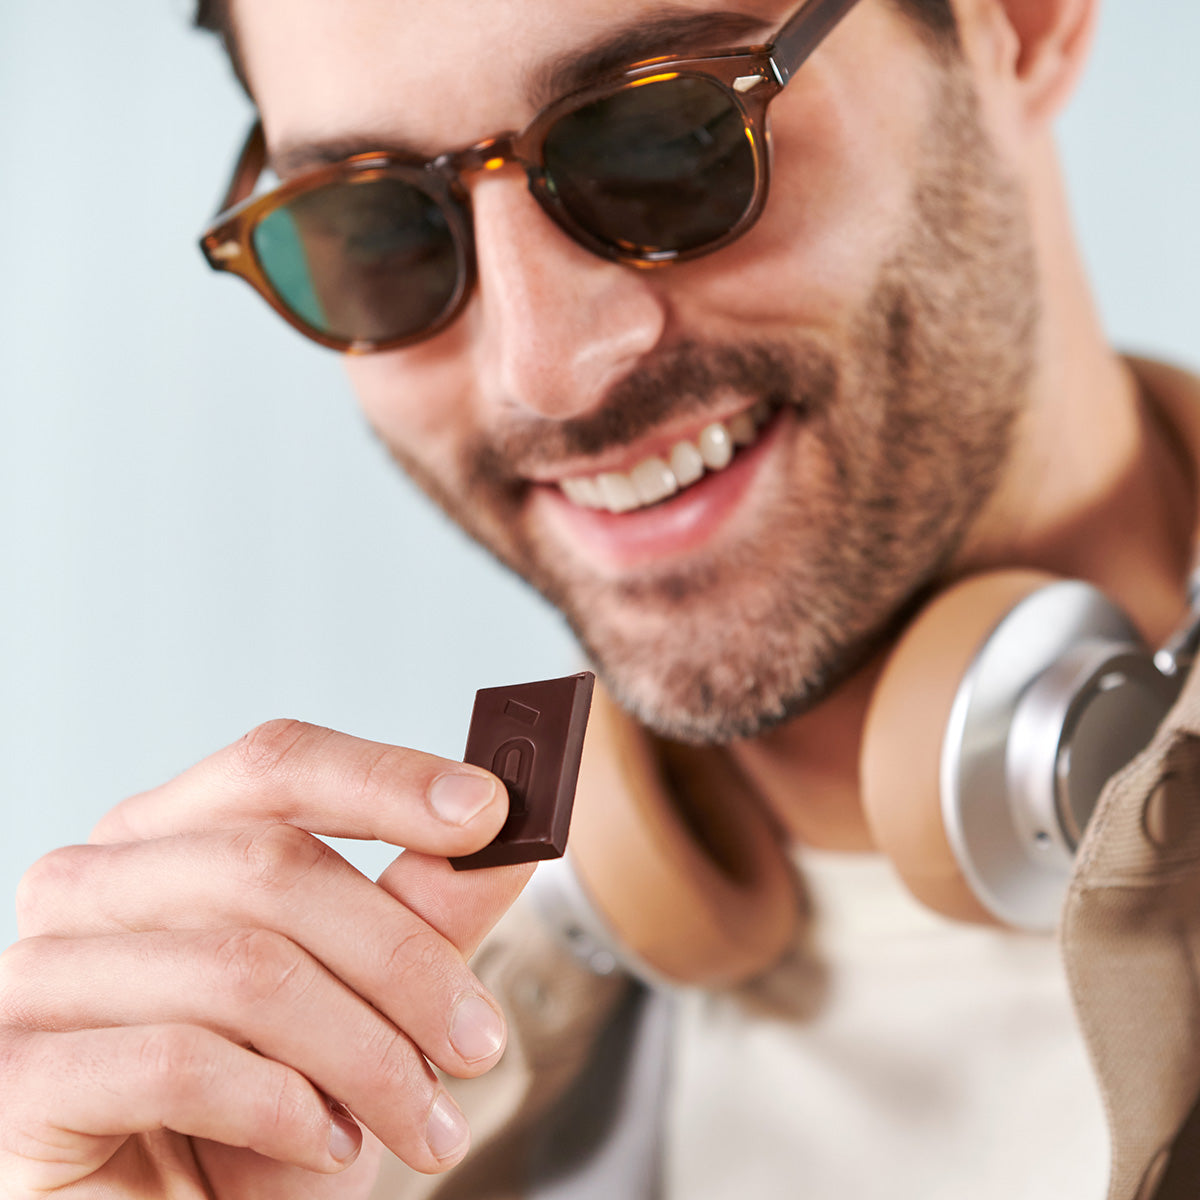 Young man wearing sunglasses and headphones ready for travel enjoying a piece of Defend Functional Chocolate